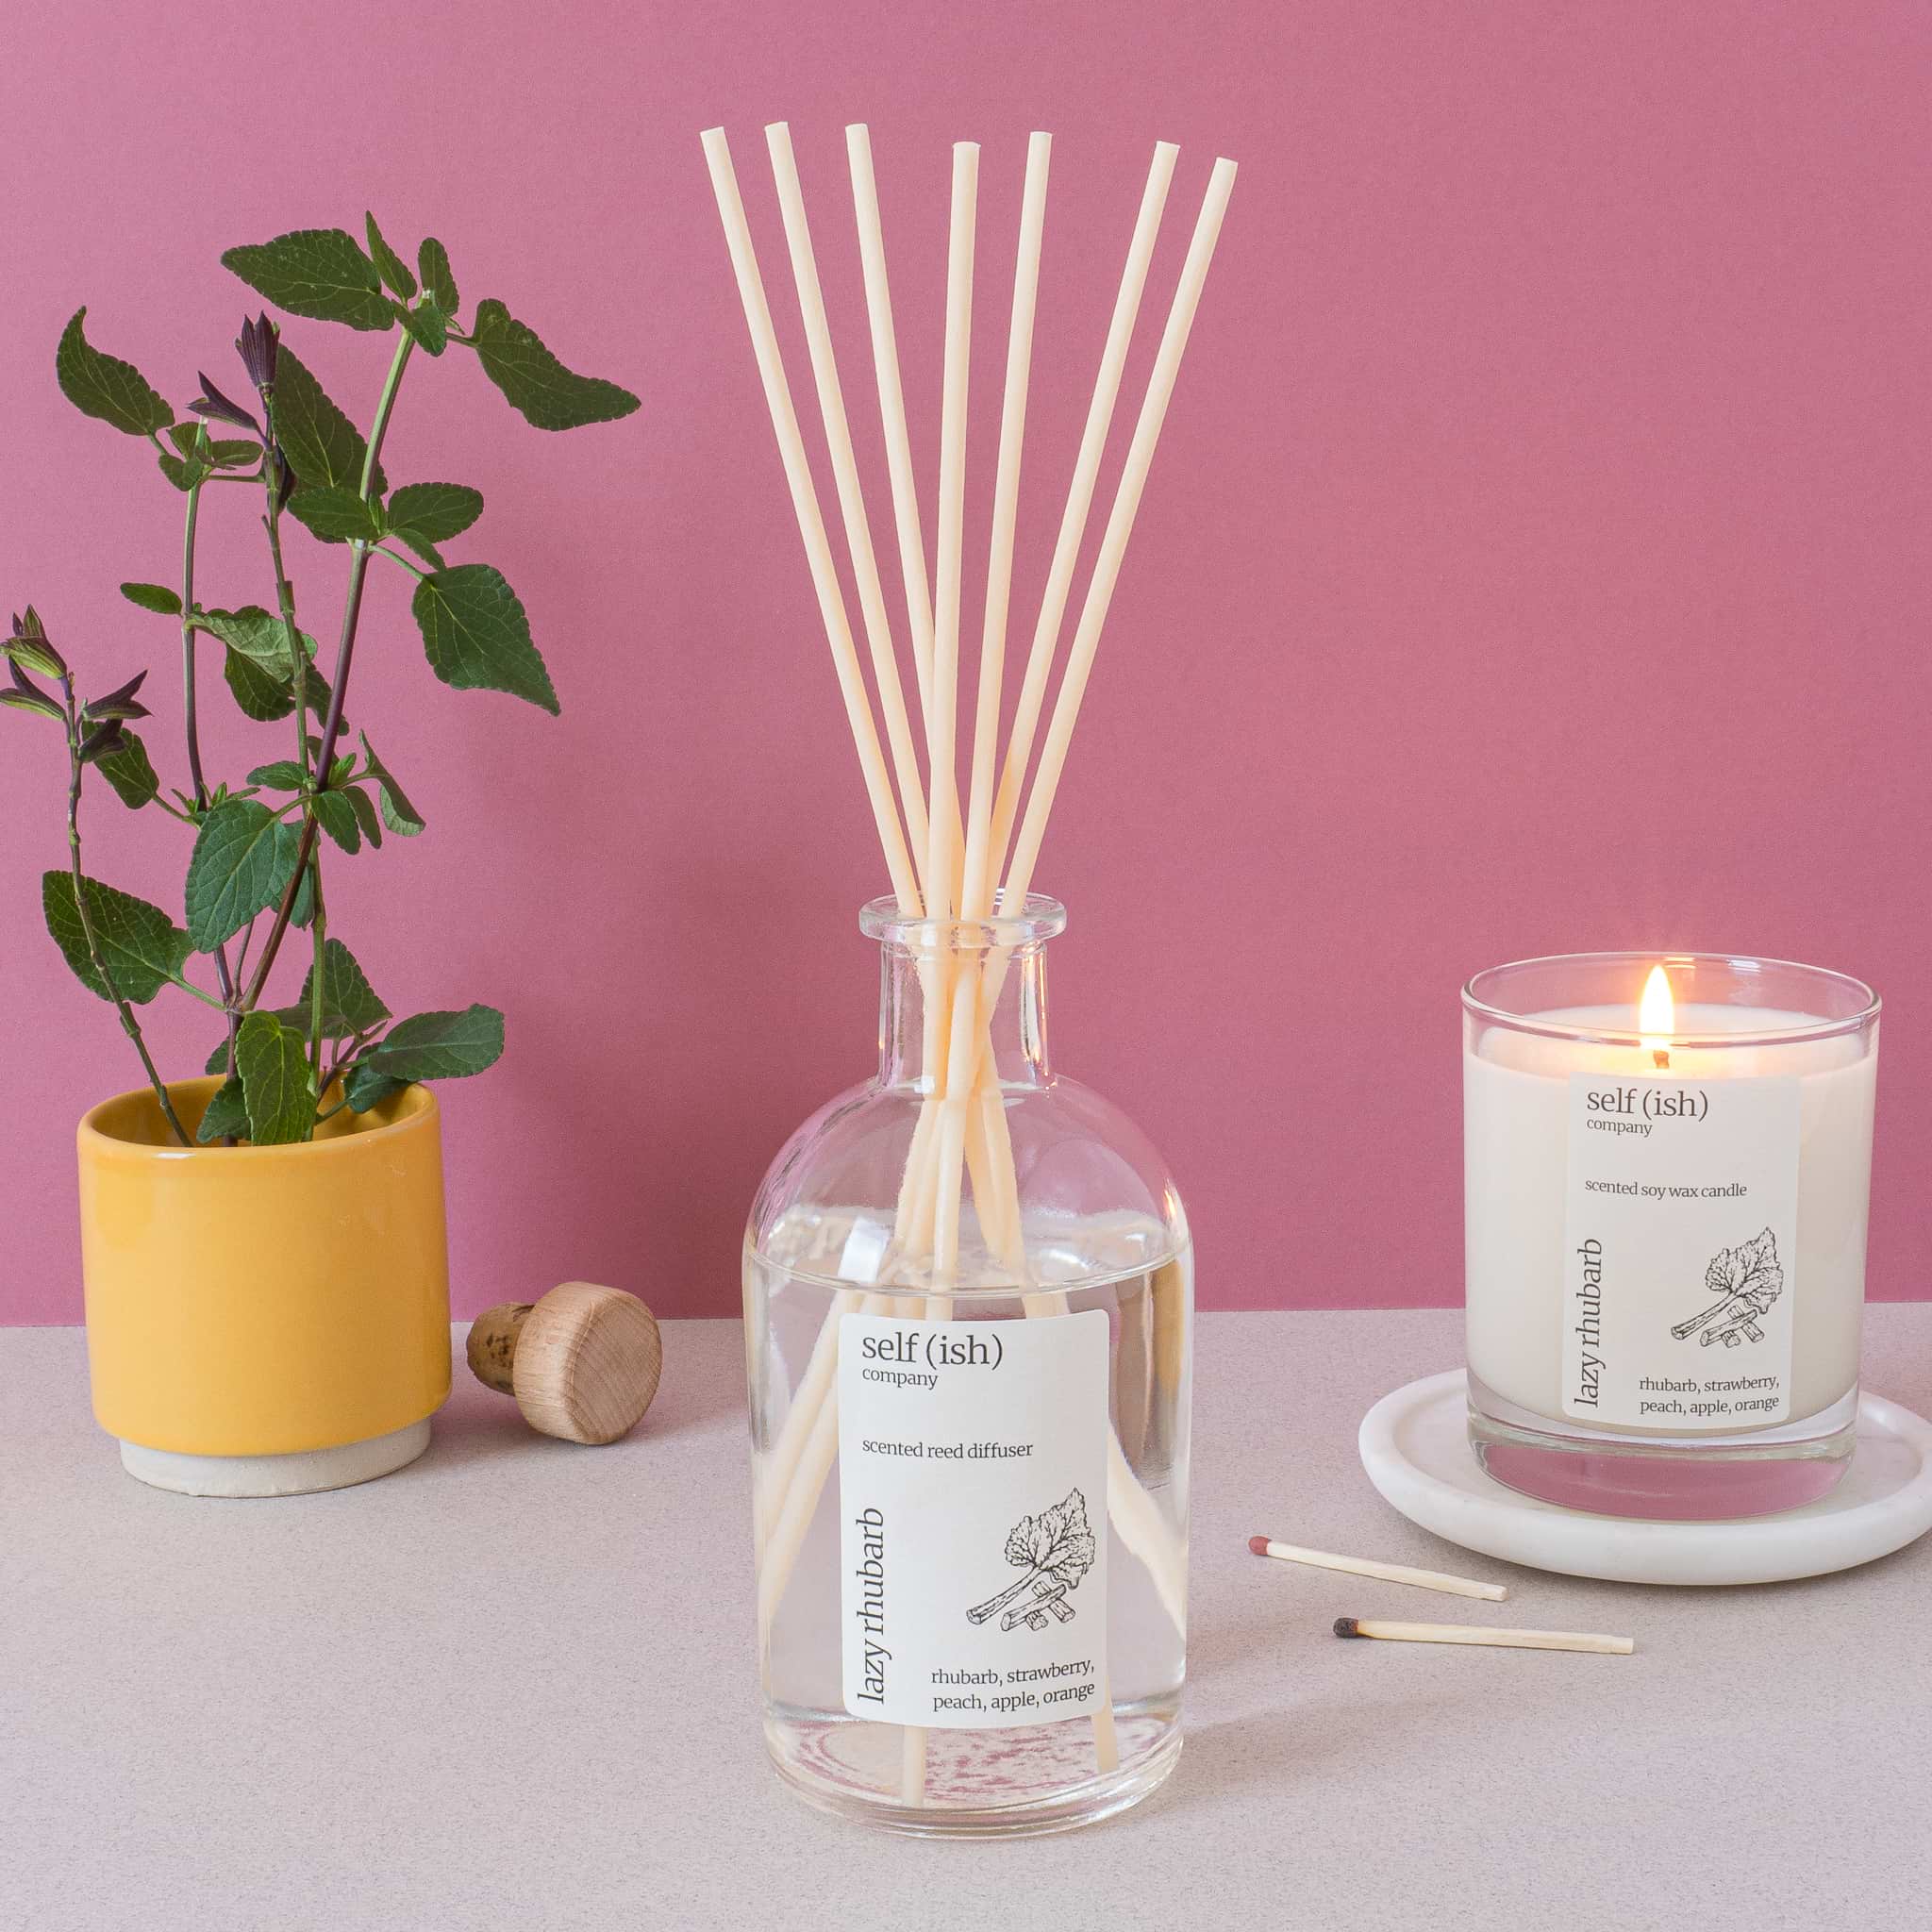 rhubarb reed diffuser with rhubarb scented candle